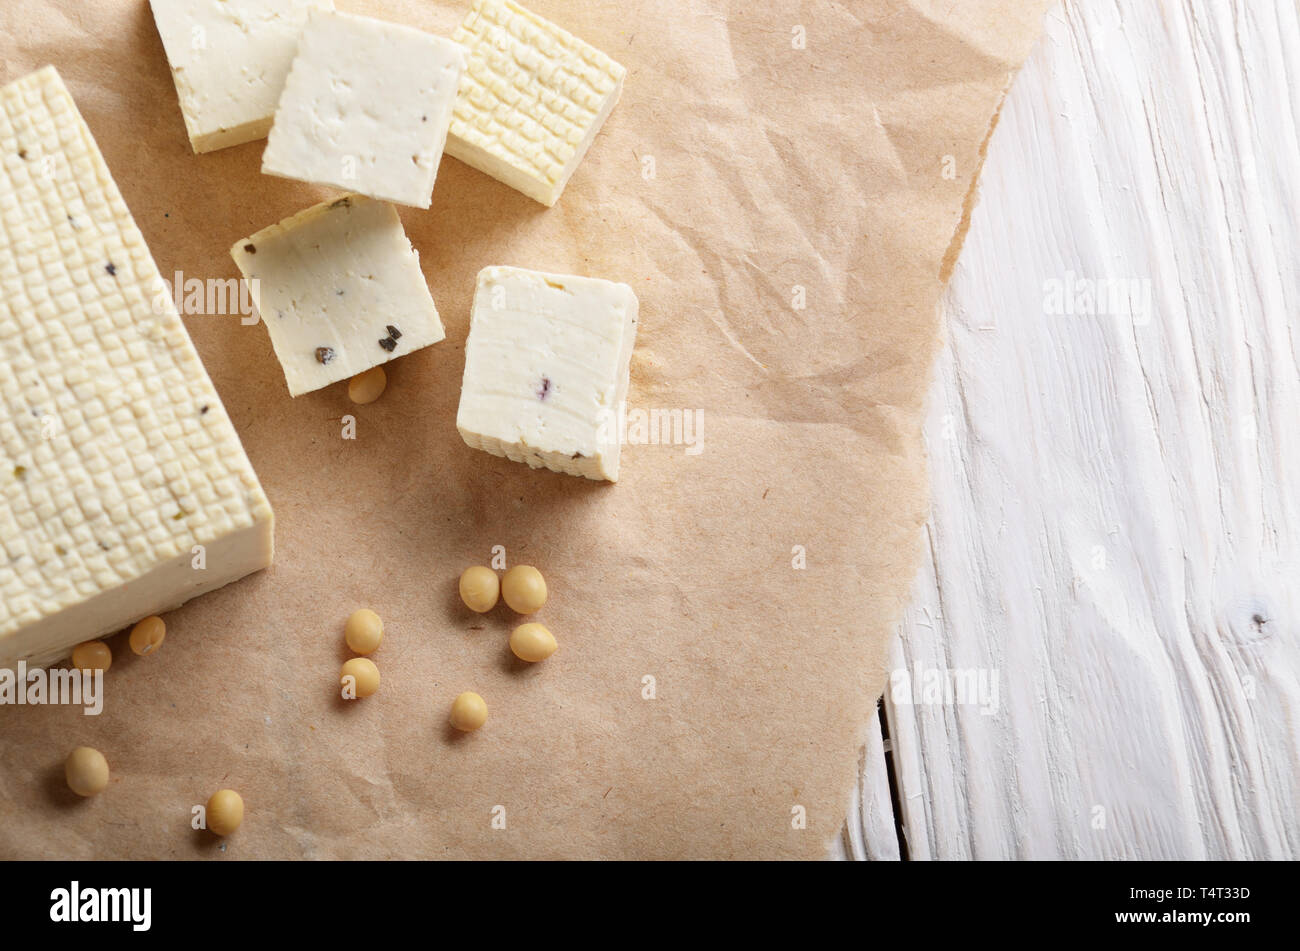 Soy Bean Curd Tofu On Parchment Paper Non Dairy Alternative Substitute For Cheese Stock Photo Alamy,Painting Baseboards With Carpet